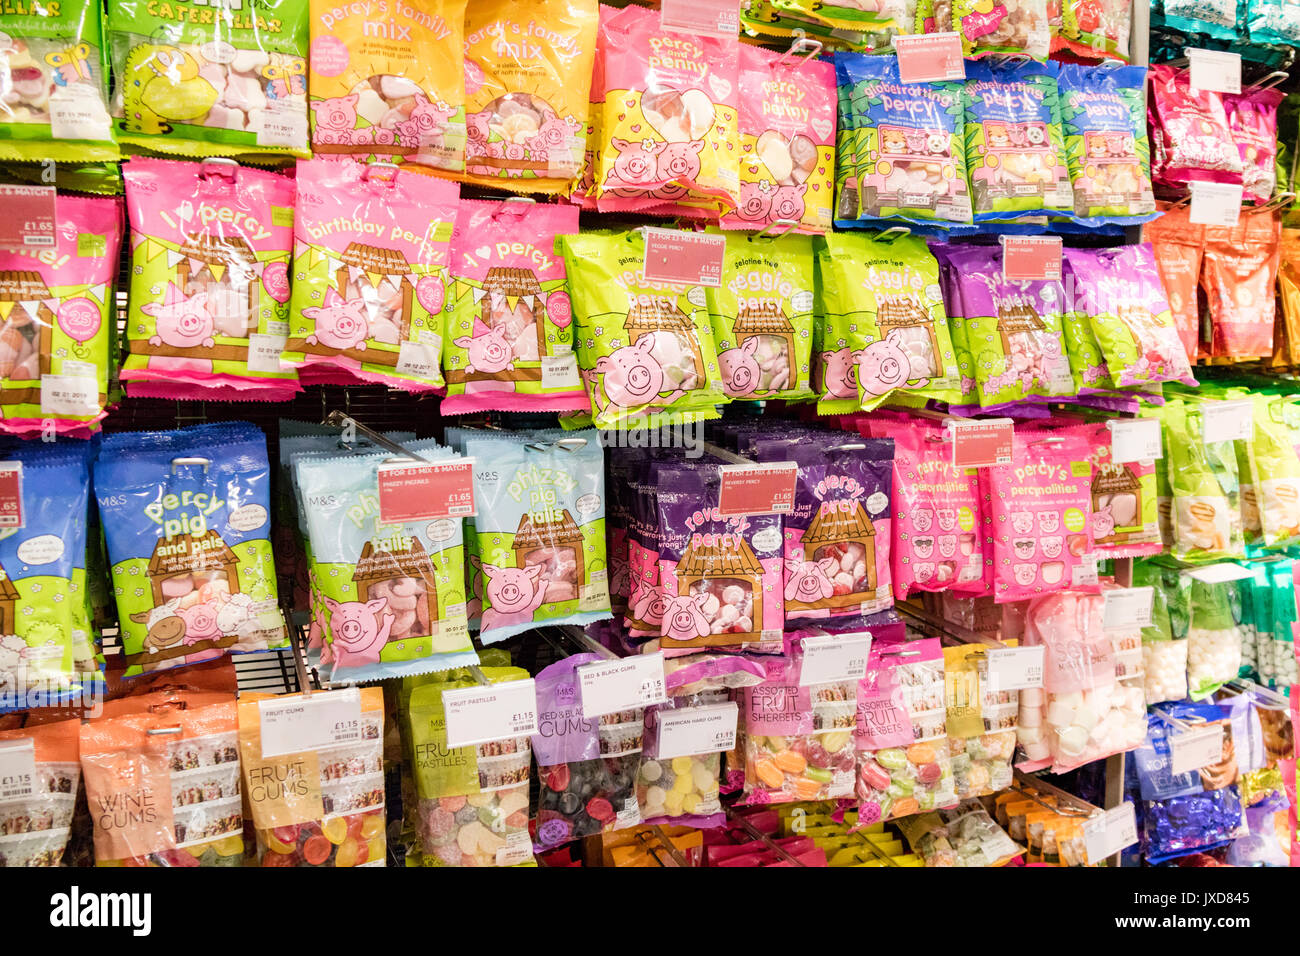 Children's sweets on display in a M&S store. England, UK Stock Photo